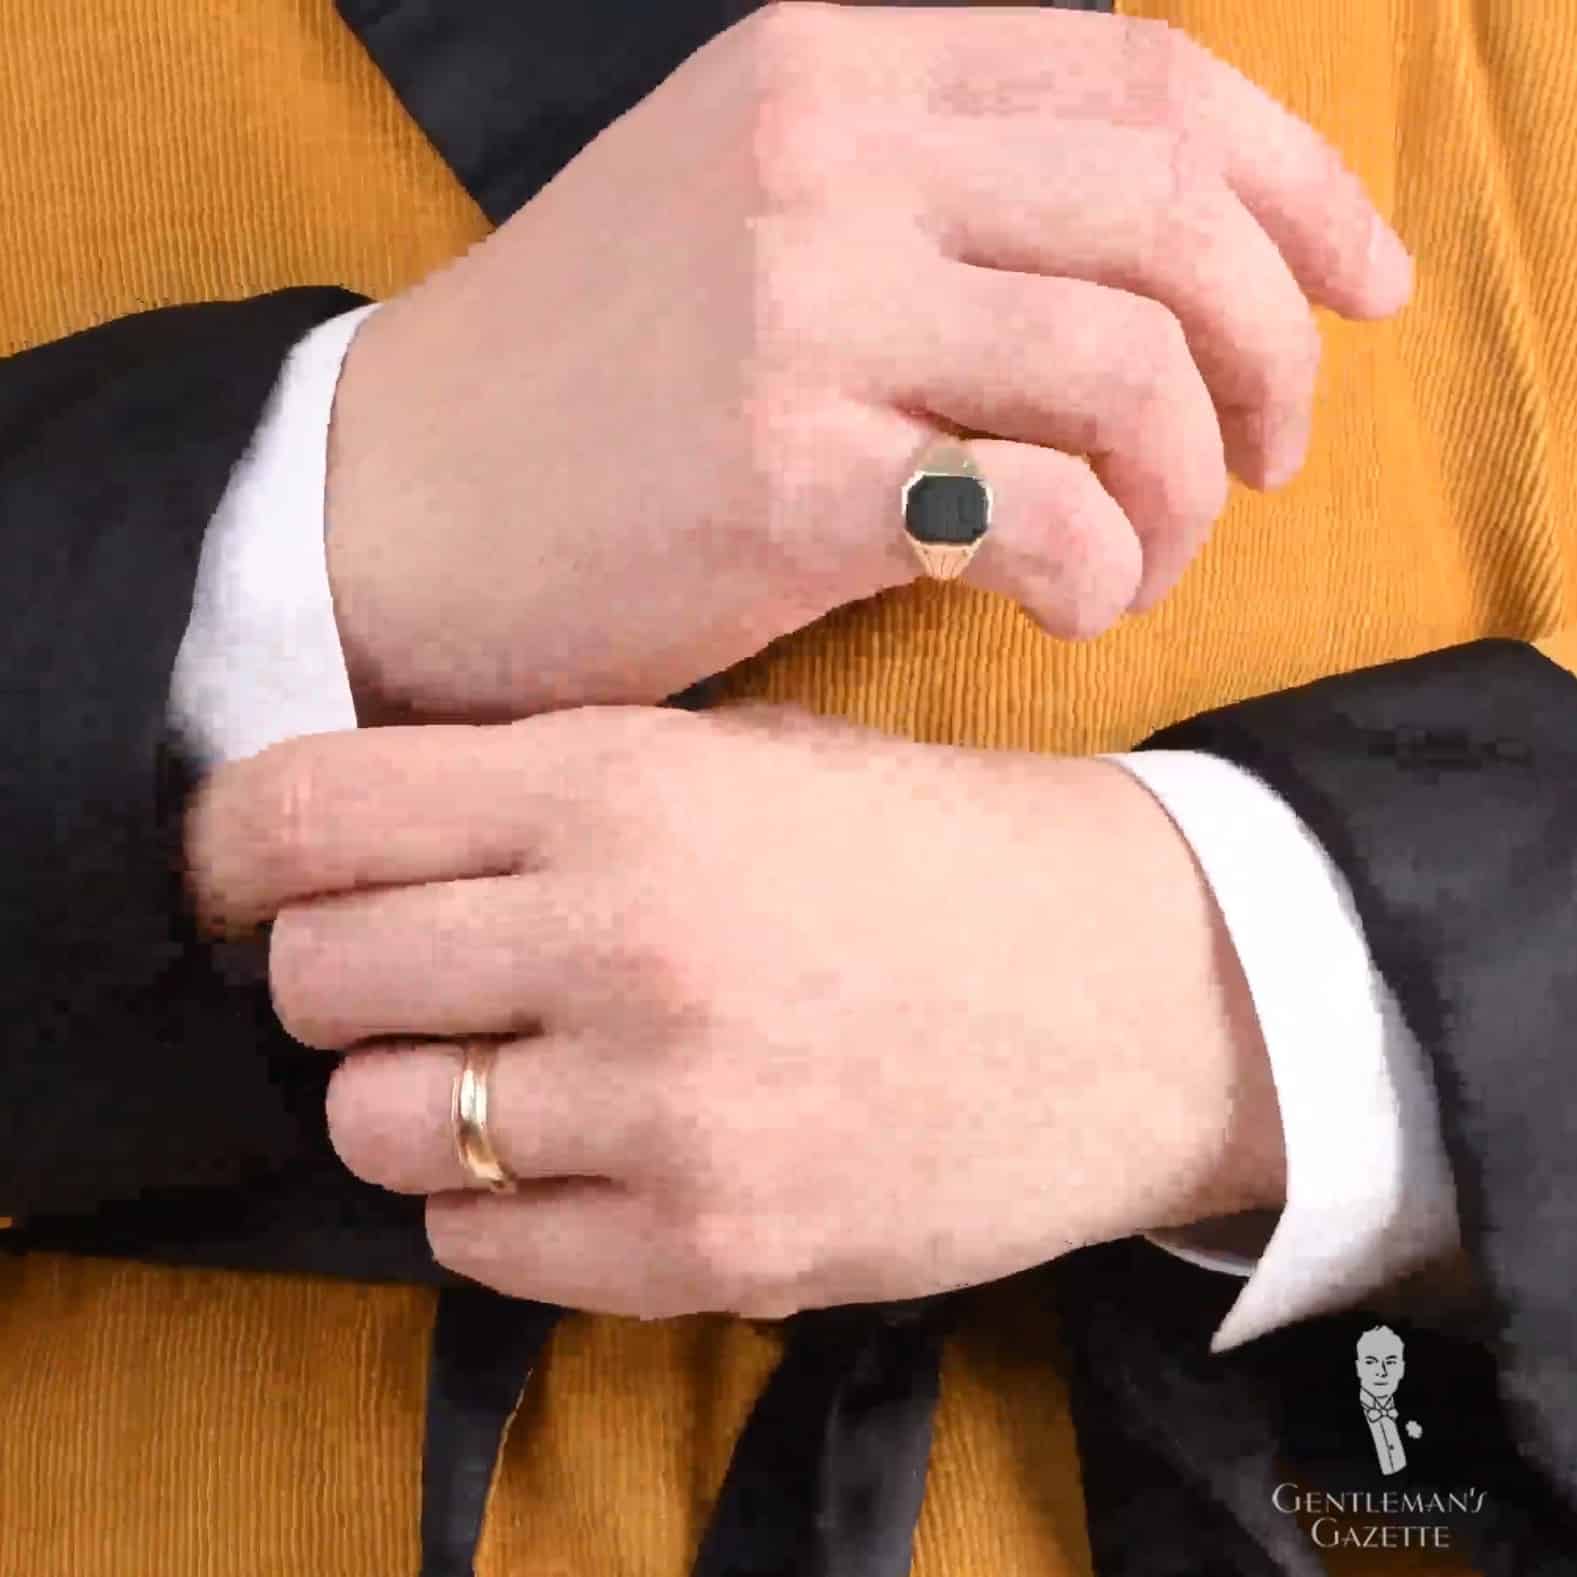 A photograph of a pair of hands with a gold wedding ring on the left ring finger and a pinky ring on the right hand